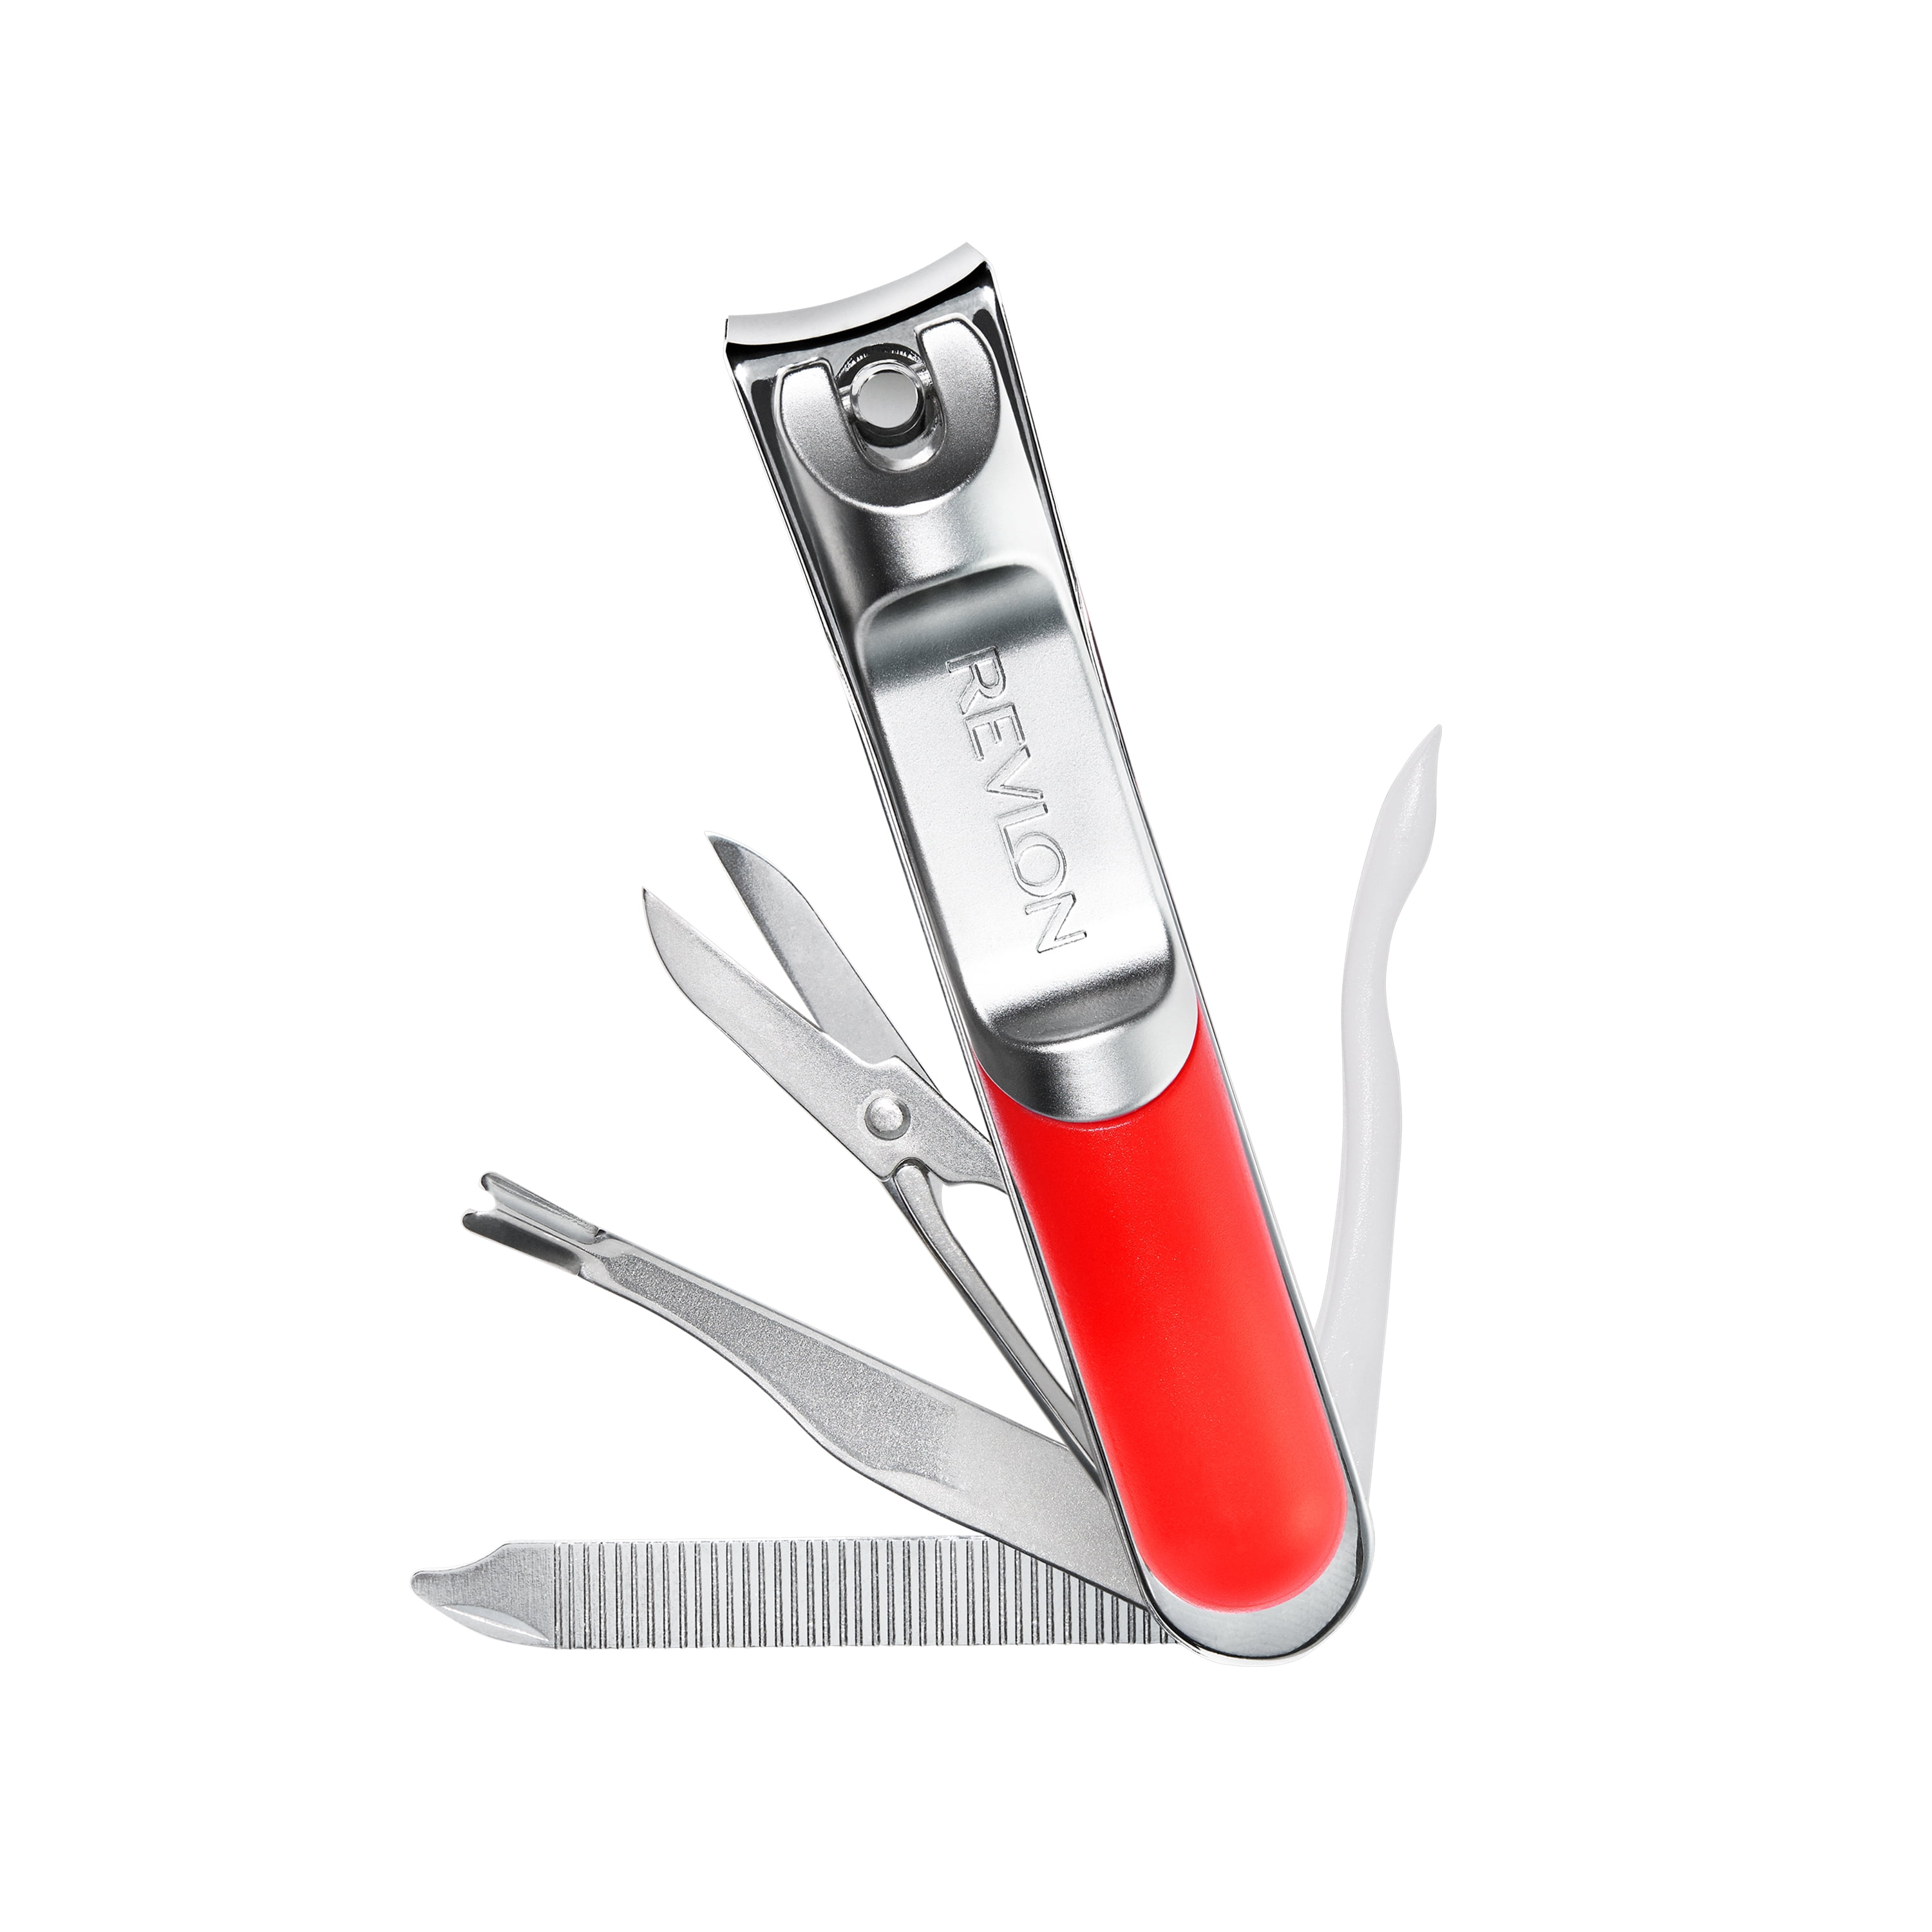 Revlon 6-in-1 Tool, Mani-Maker All-in-One Travel Tool Includes Nail Clipper,  Cuticle Pusher, Trimmer, File, Under-Nail Cleaner & Scissor, Trimming and  Grooming 